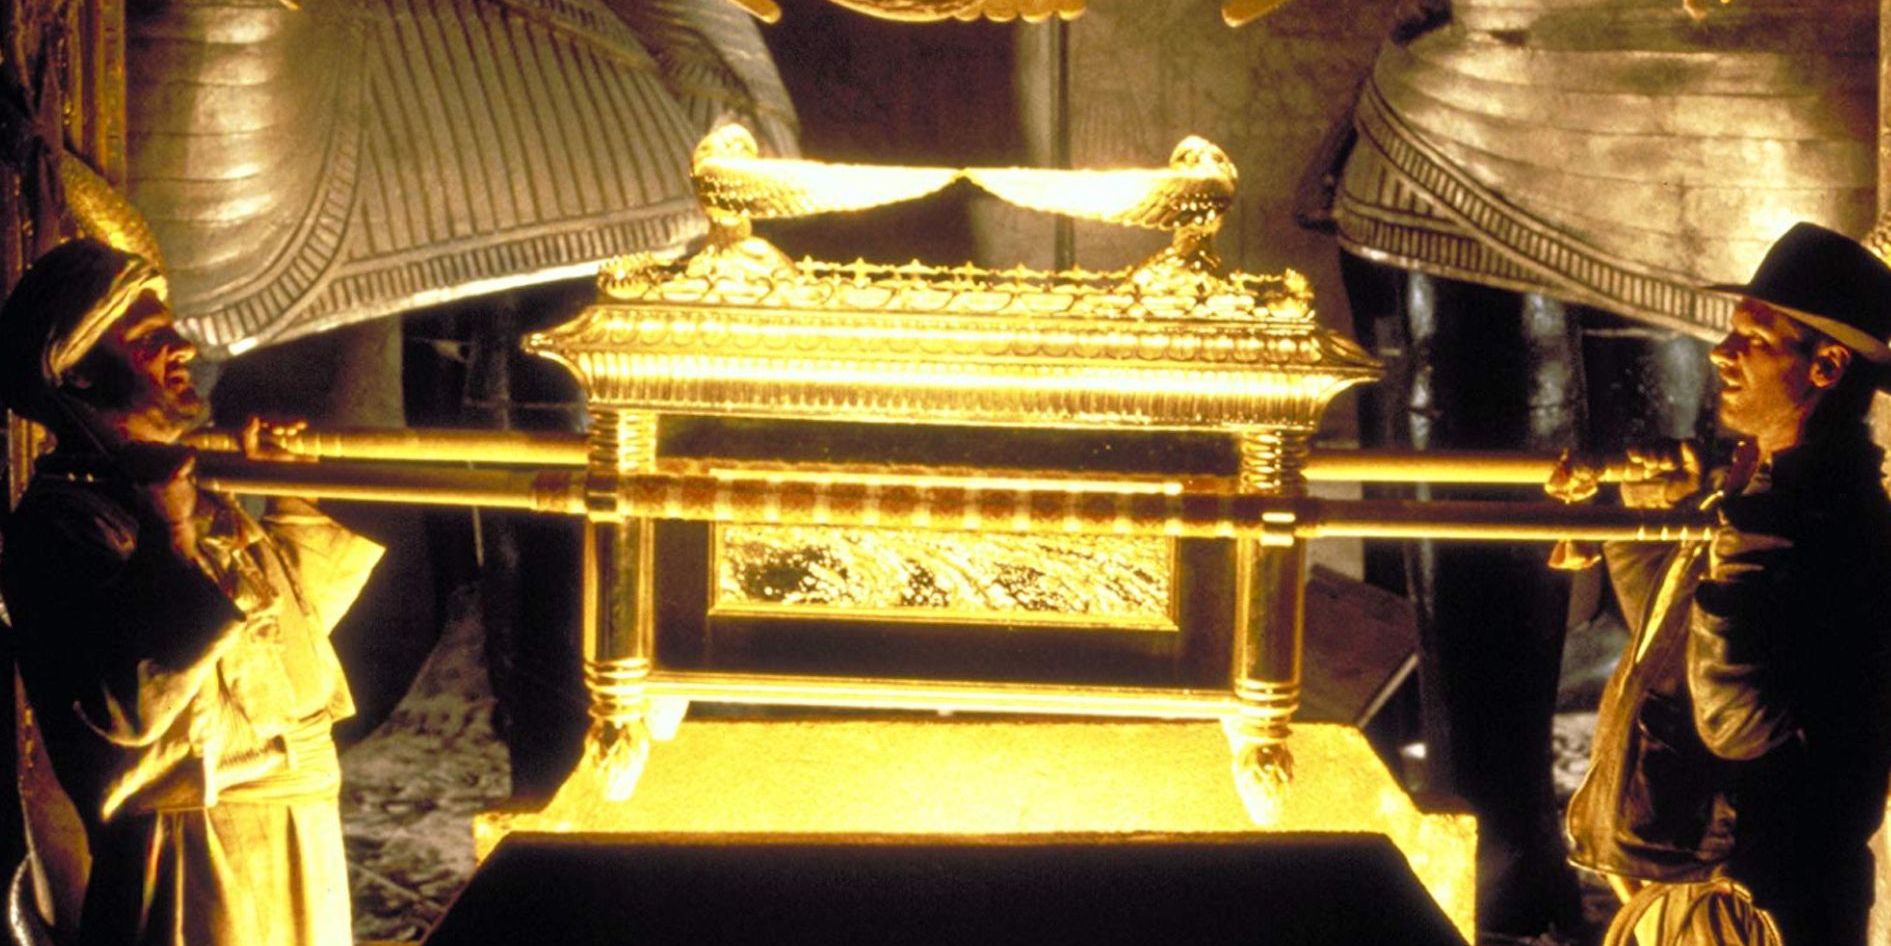 Raiders Of The Lost Ark: Ark Of The Covenant golden chest.